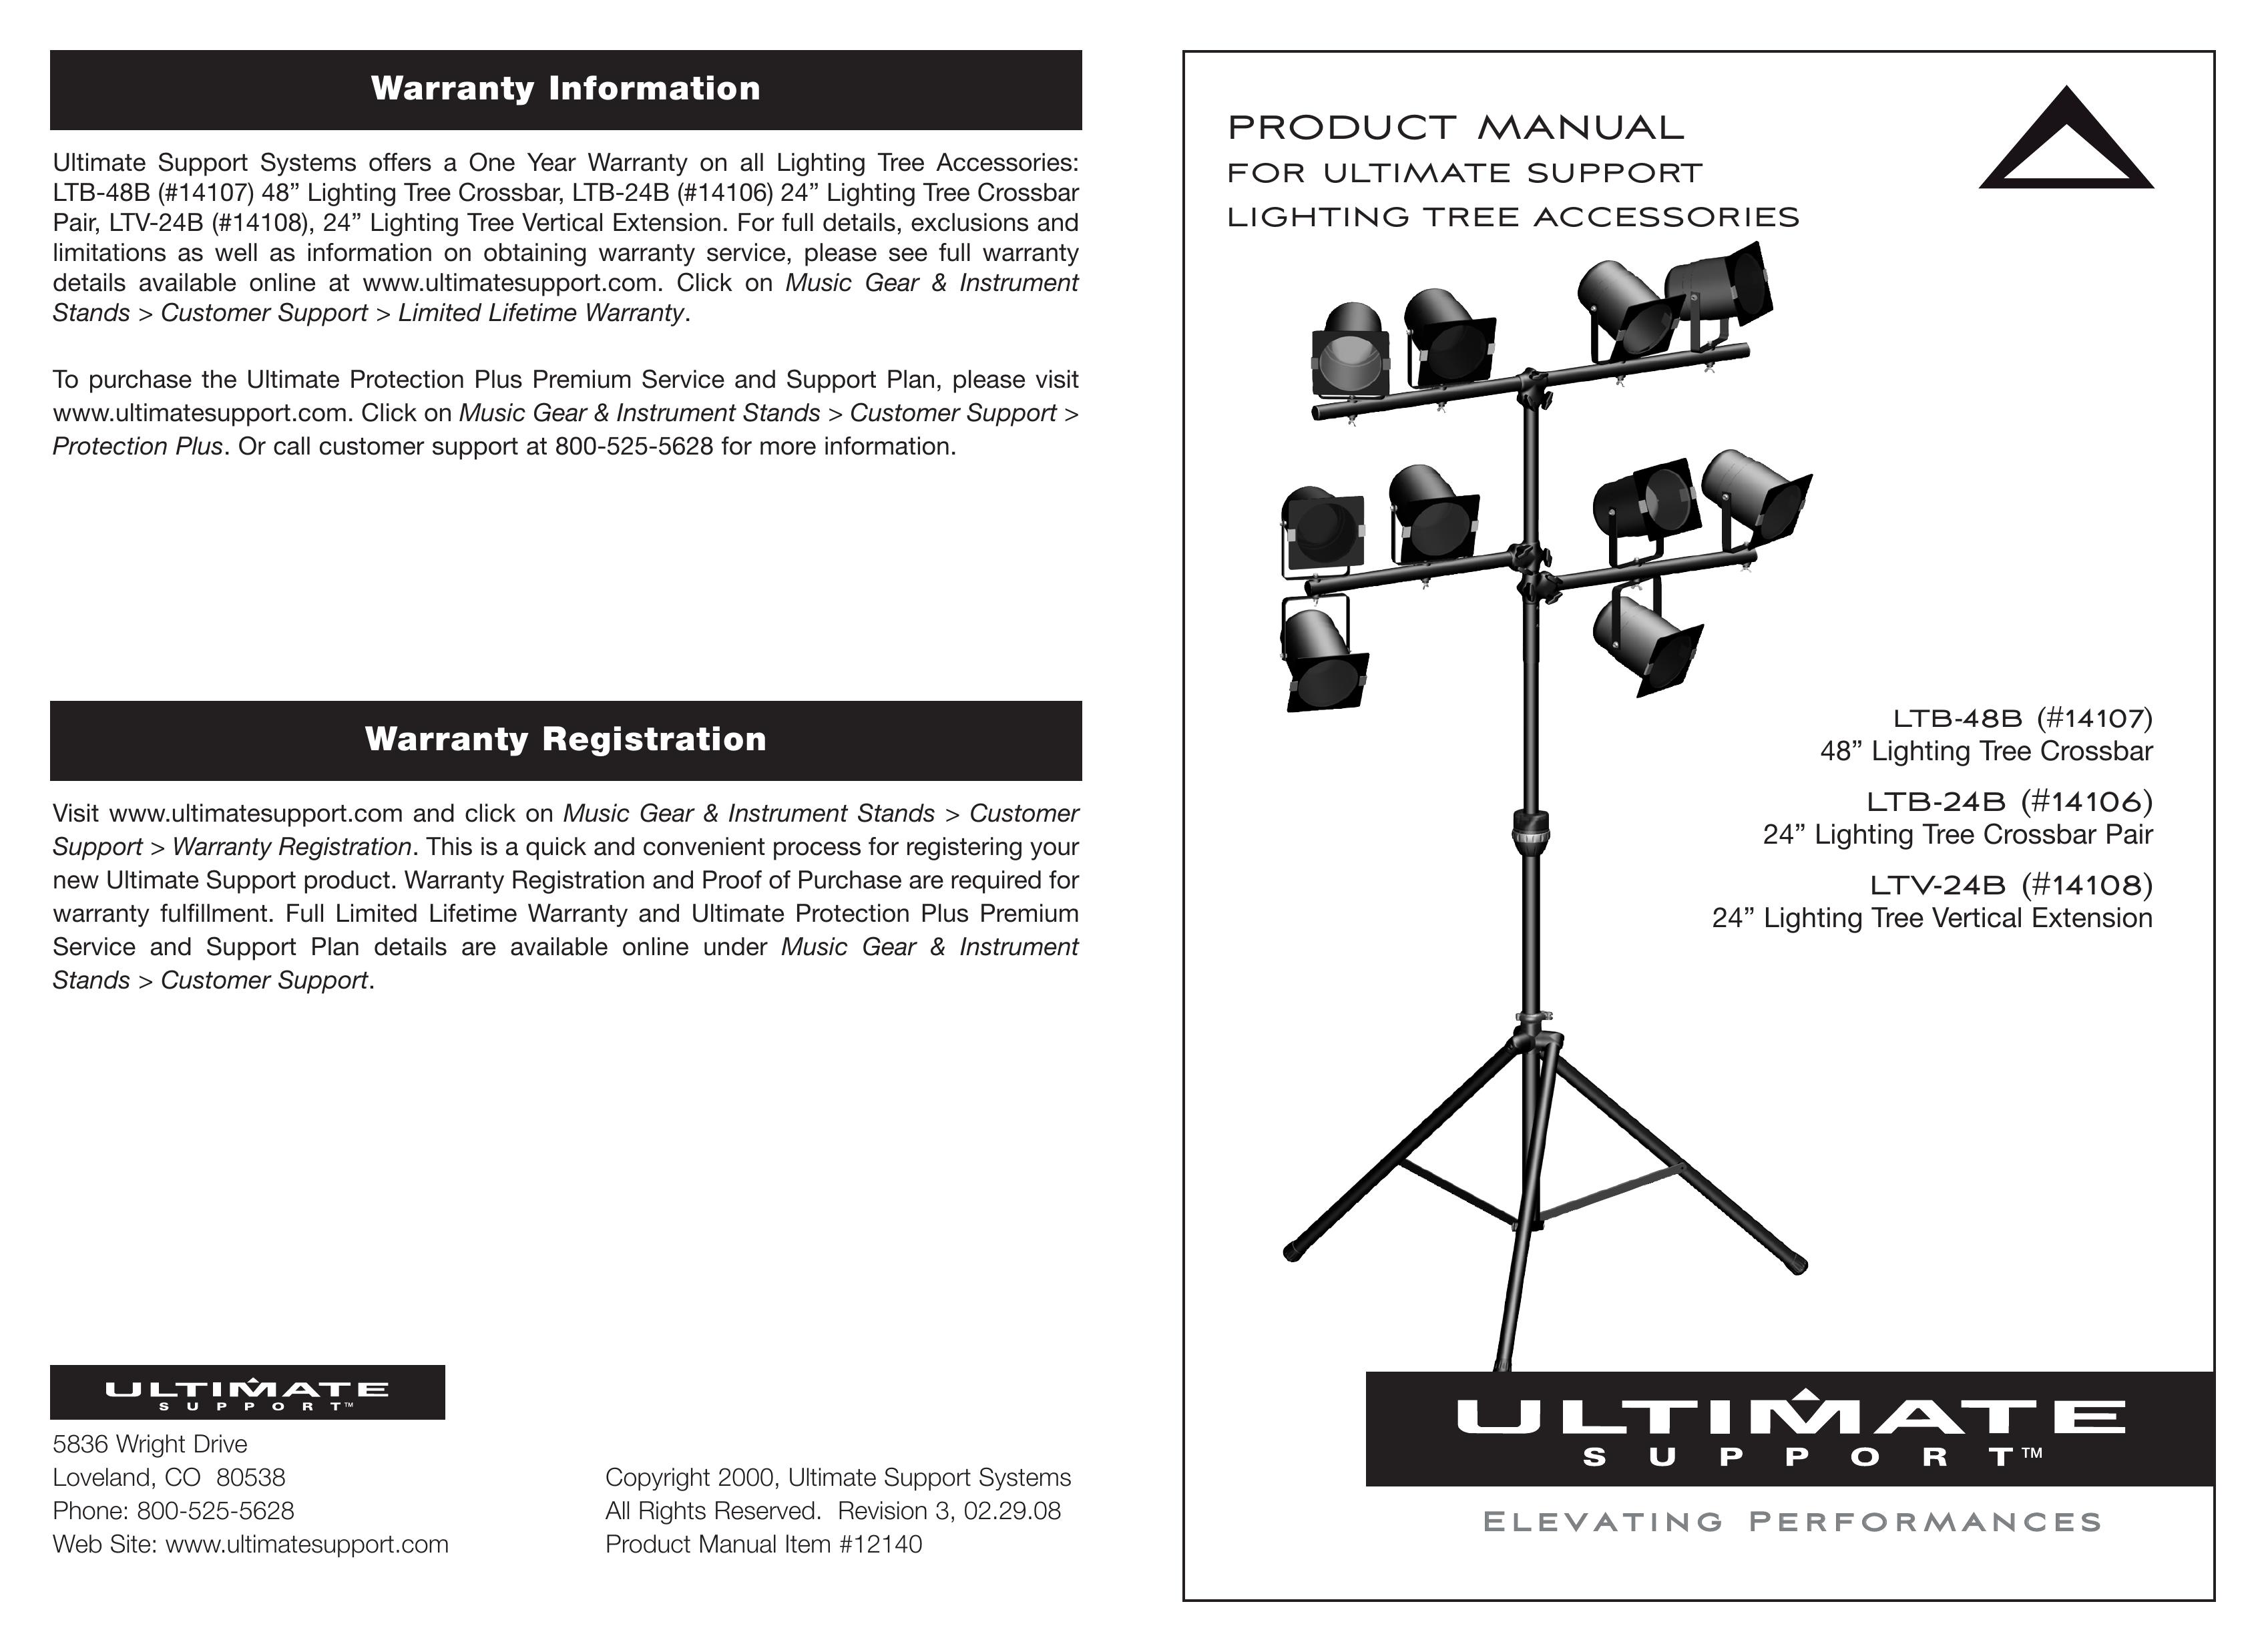 Ultimate Support Systems LTB-48B Marine Lighting User Manual